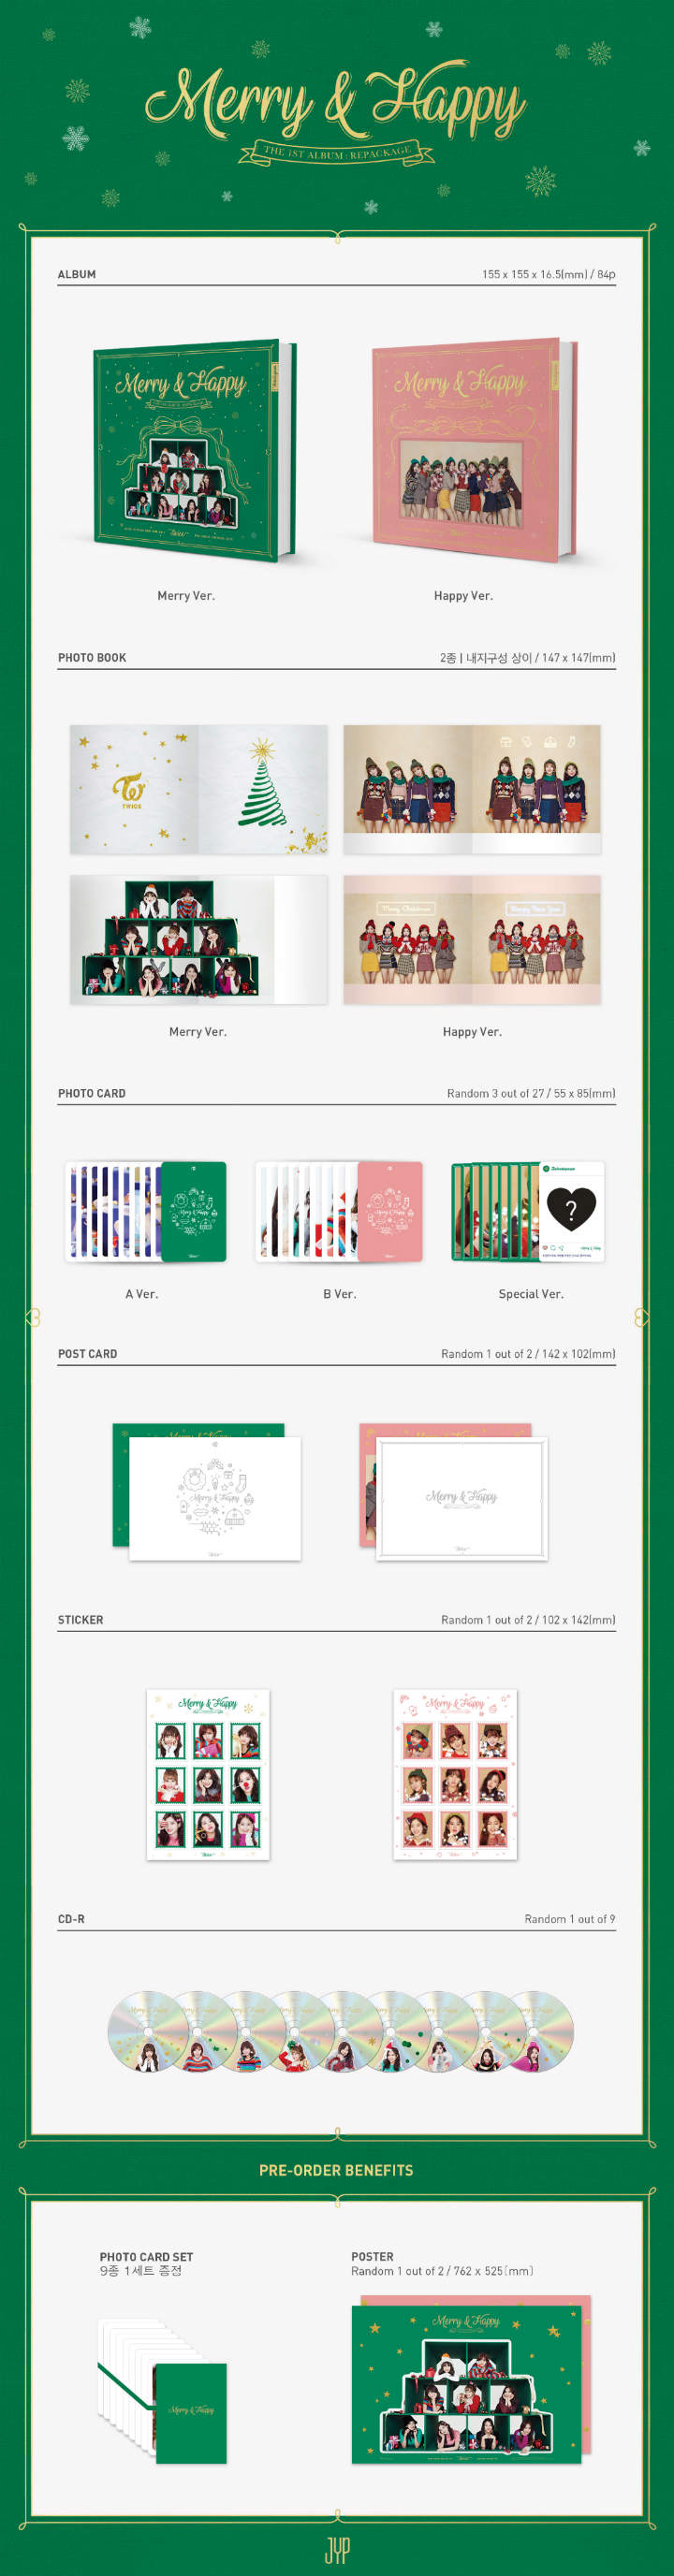 TWICE Merry and Happy (1st album repackage) Infographic